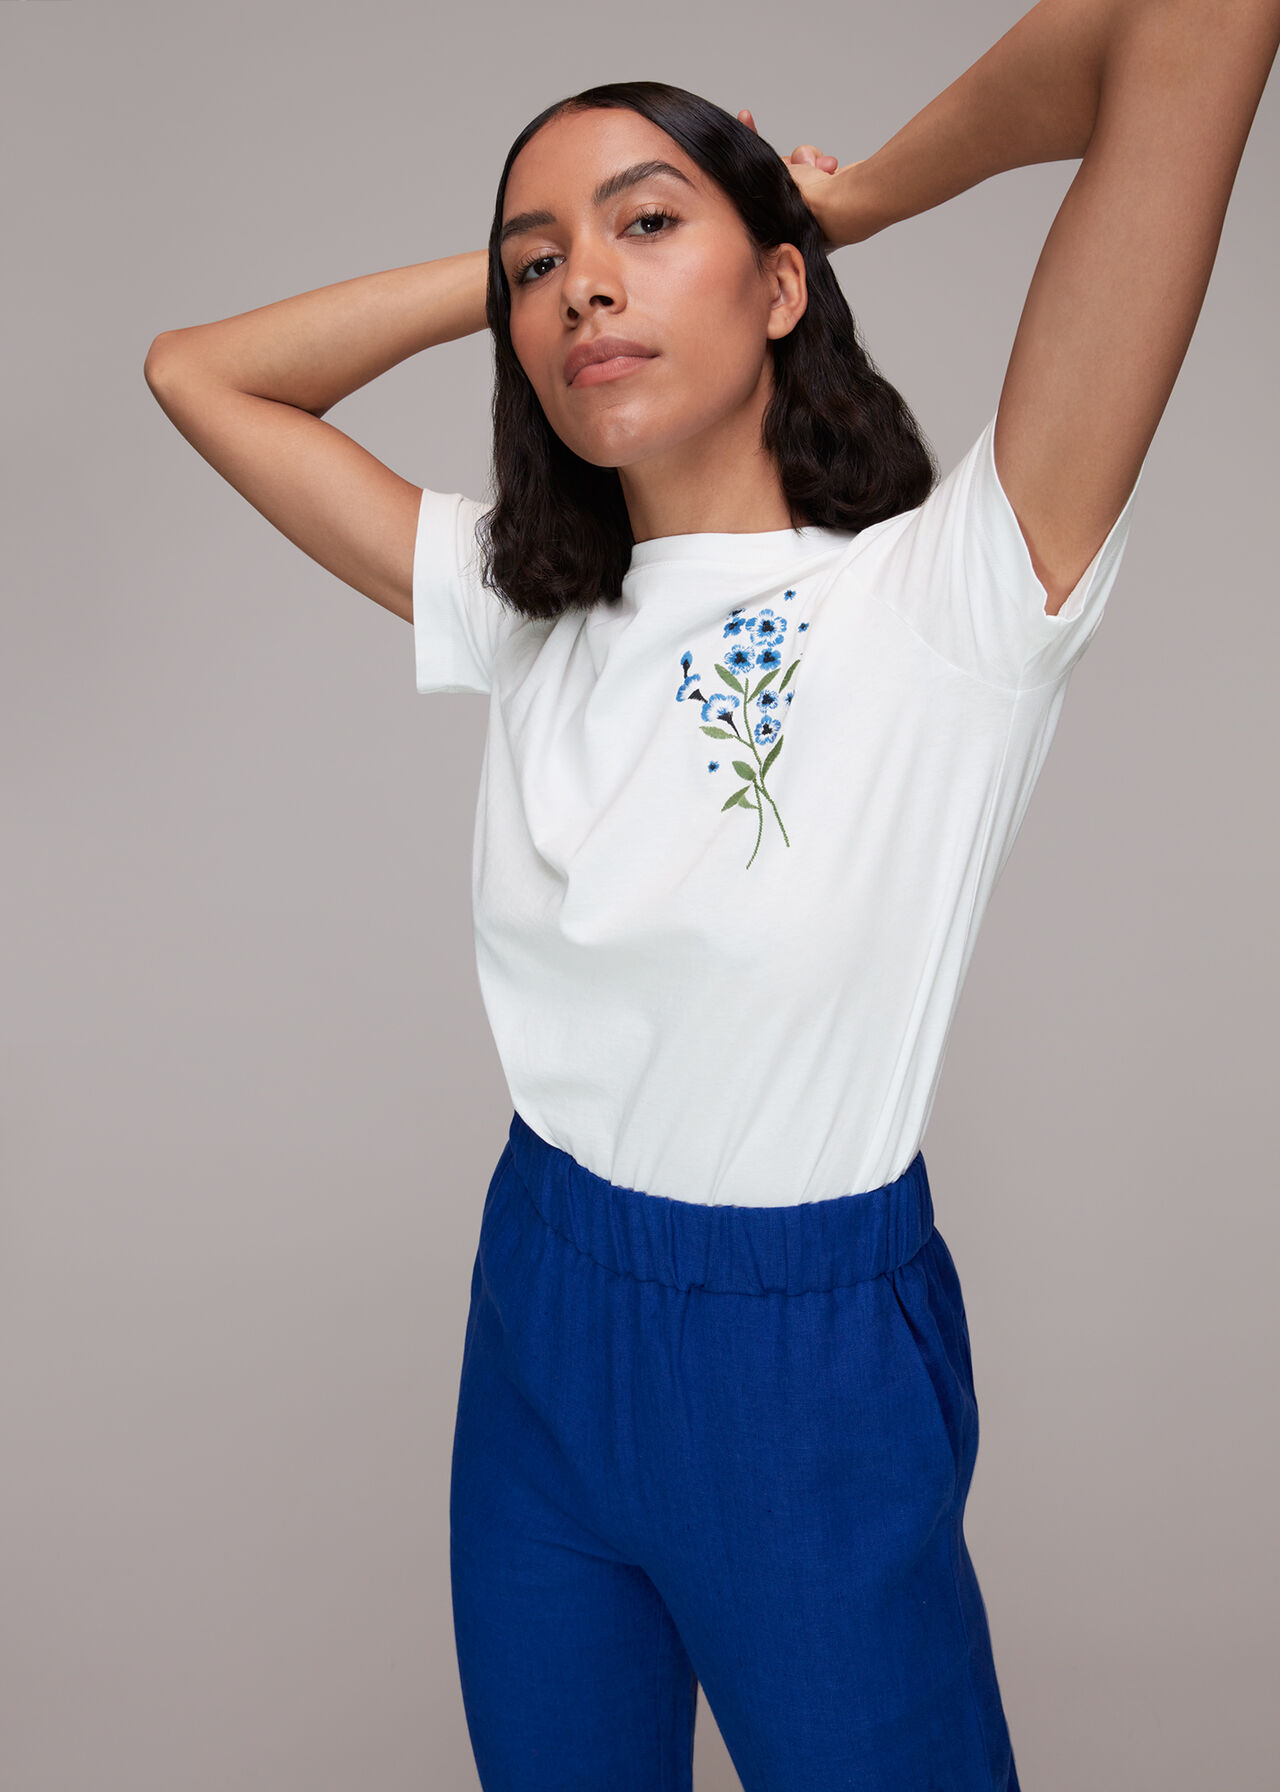 Embroidered Floral Tshirt